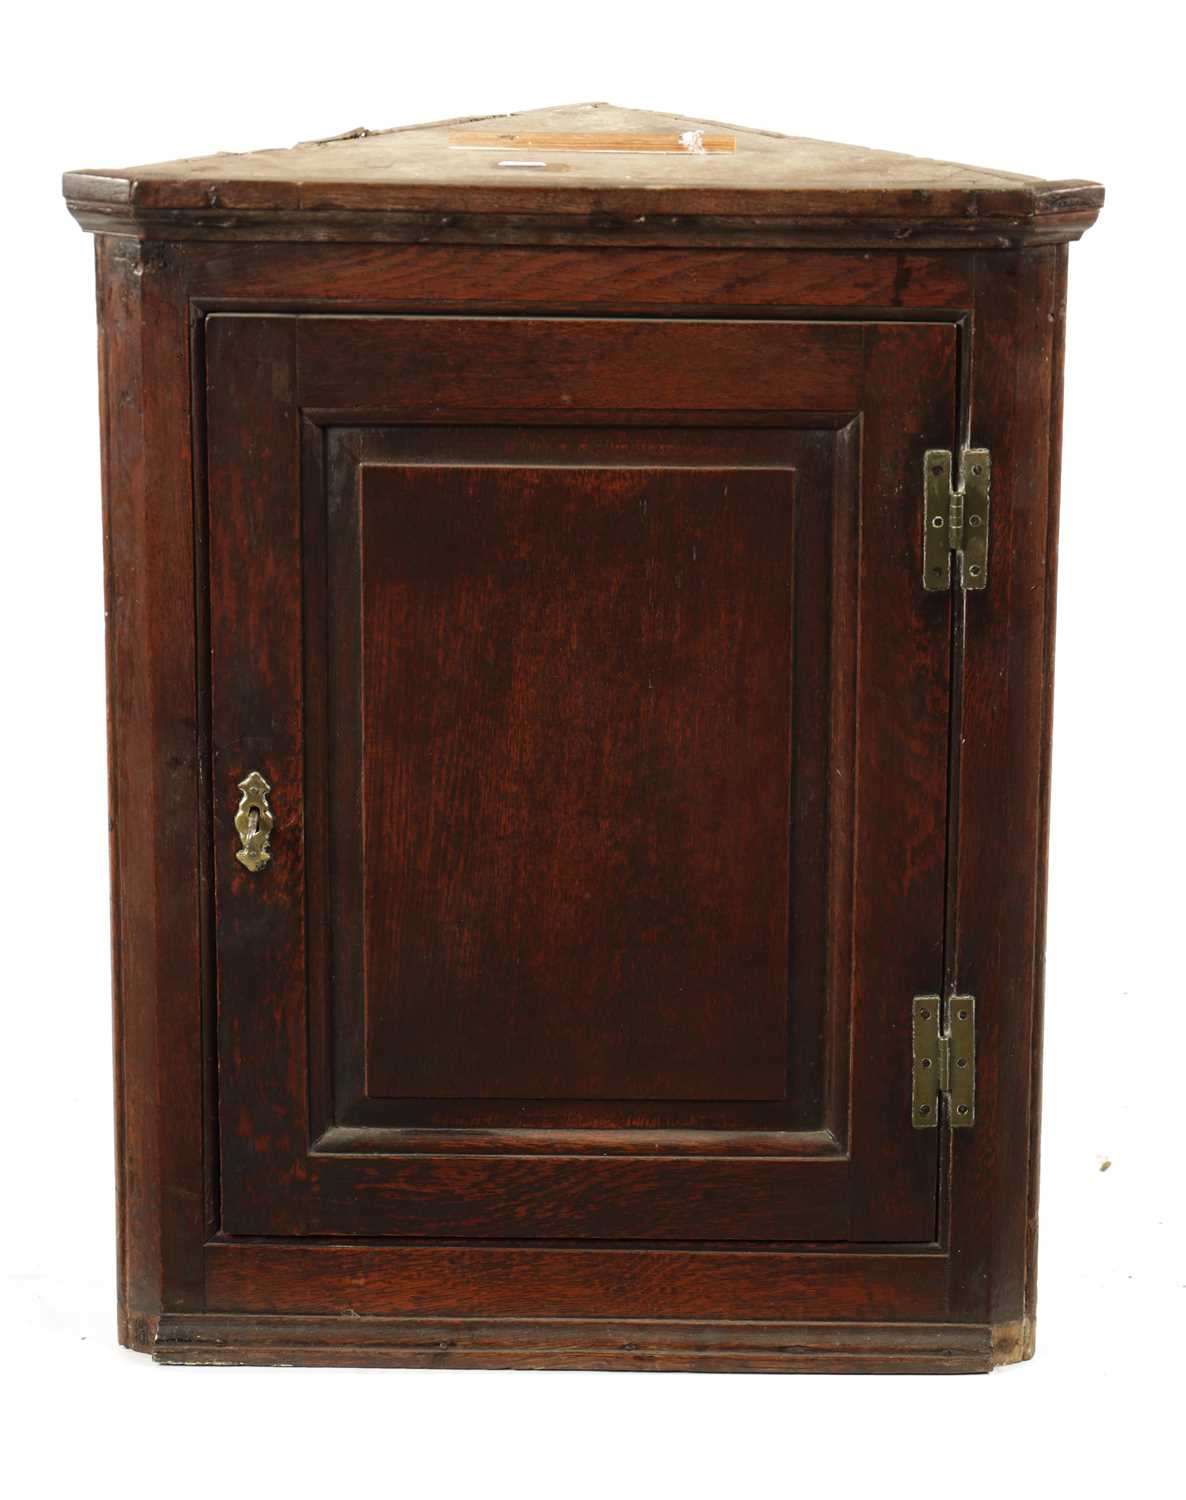 A SMALL 18TH CENTURY PANELLED OAK HANGING CORNER CUPBOARD